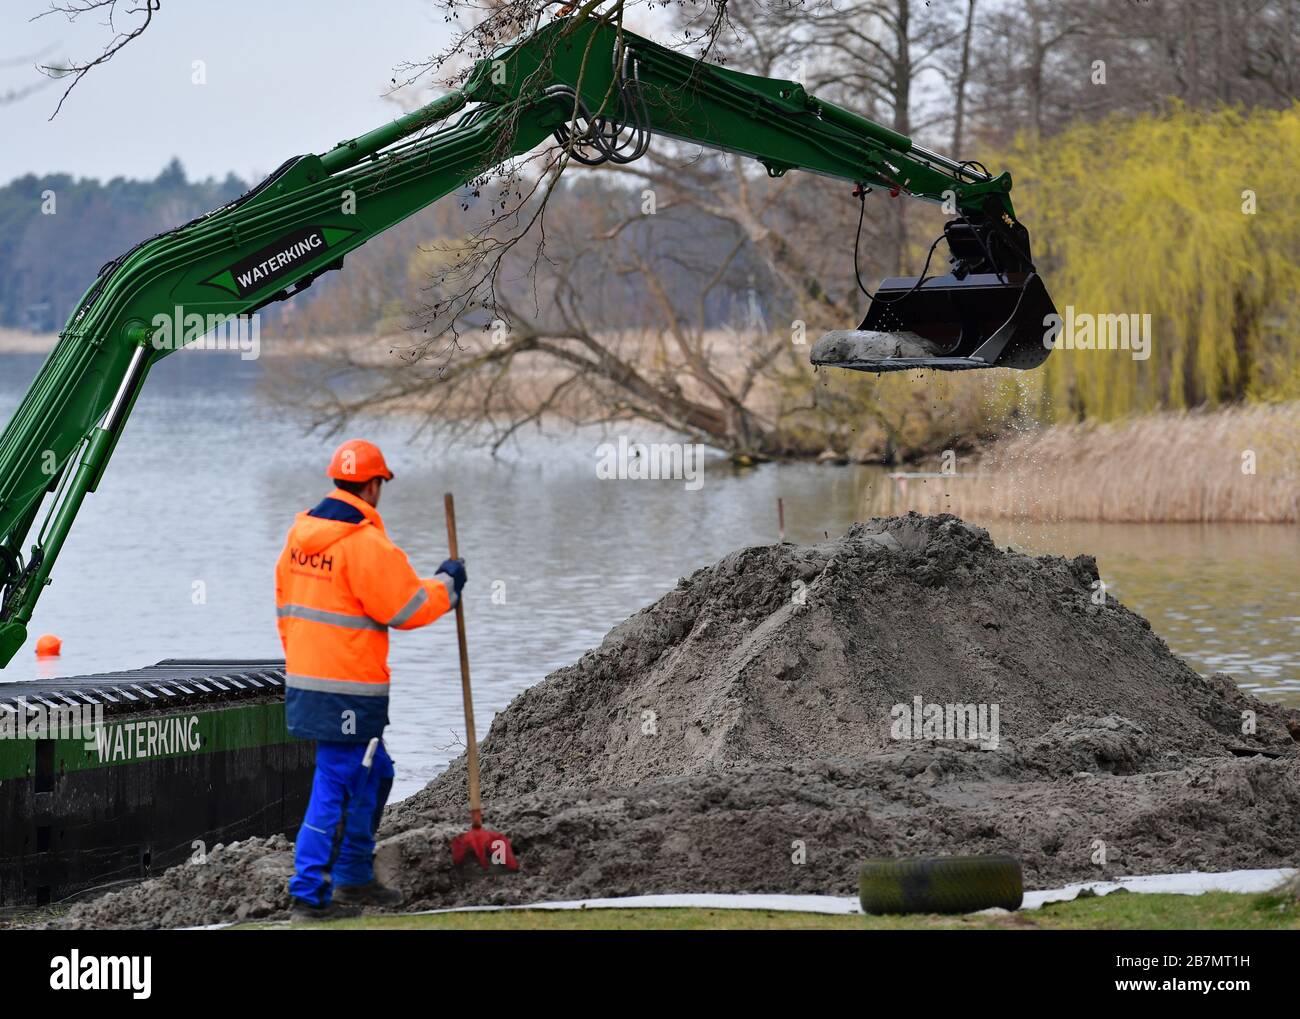 Wandlitz, Germany. 17th Mar, 2020. A worker of Koch Munitionsbergung GmbH  Oranienburg watches the dredger "Waterking", which dredges mud from the  near shore of the Wandlitzsee to the outside. Ammunition had been